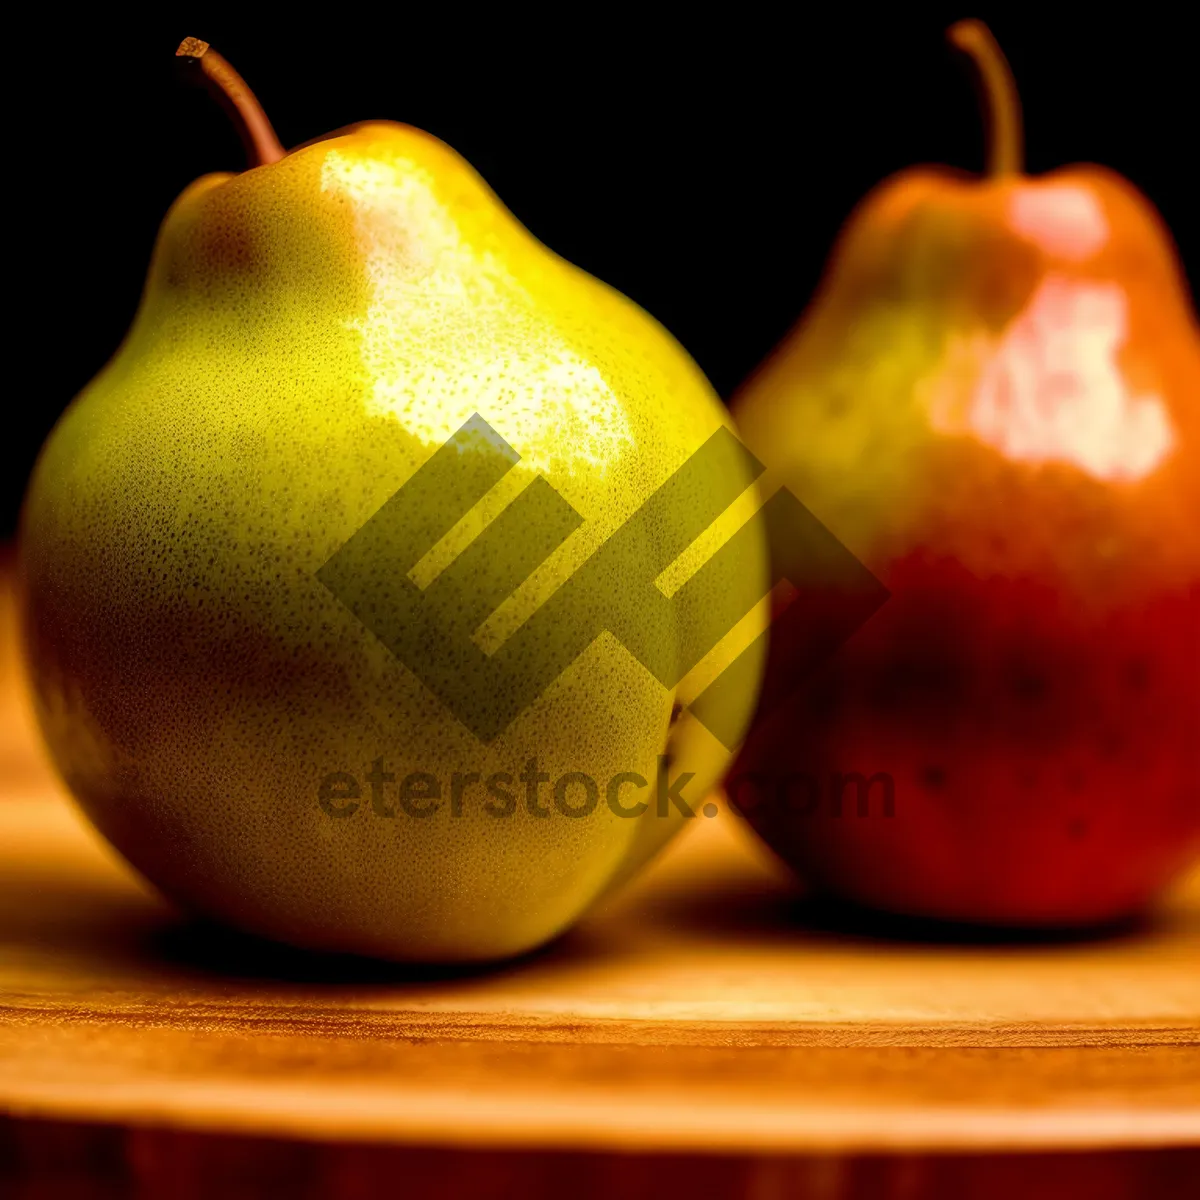 Picture of Fresh and Juicy Pear - A Delicious and Healthy Edible Fruit